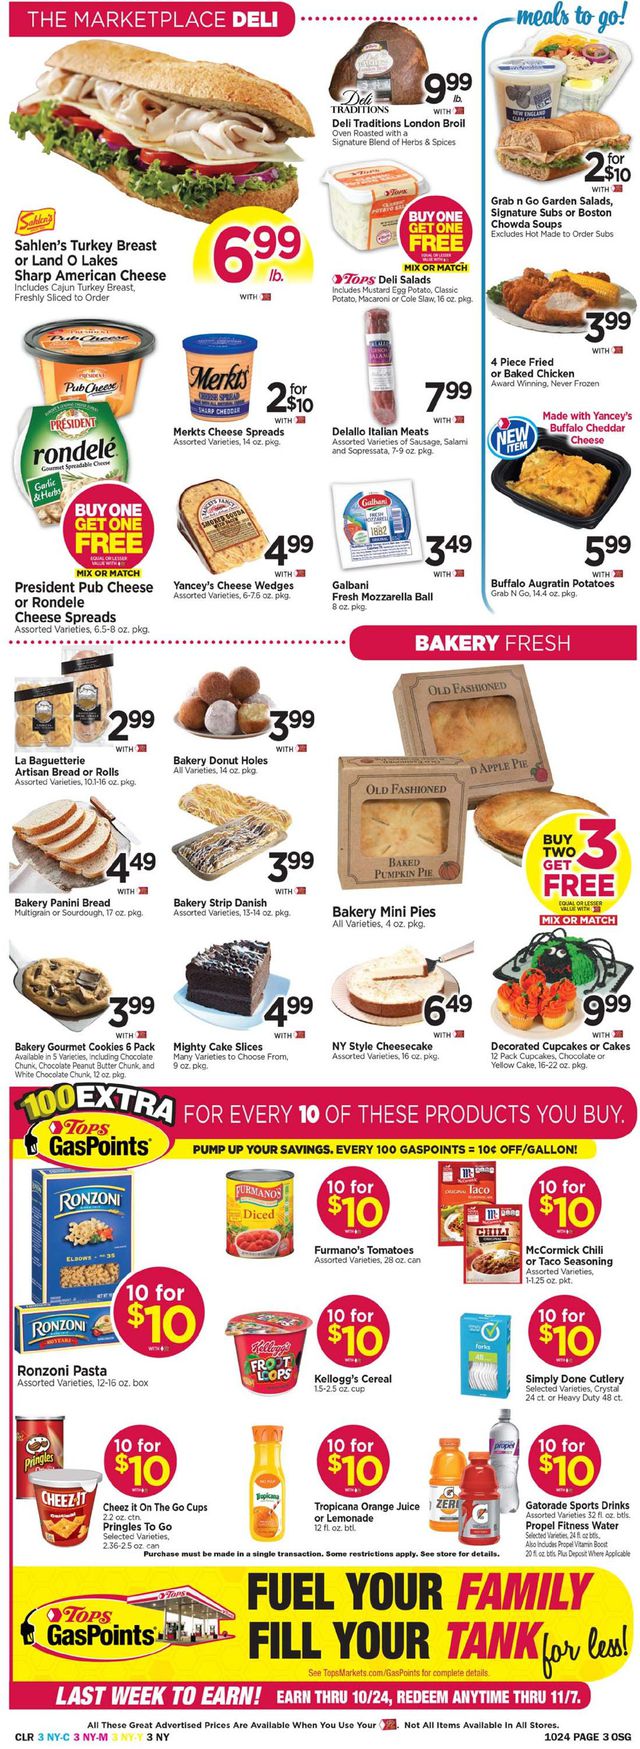 Tops Friendly Markets Ad from 10/18/2020